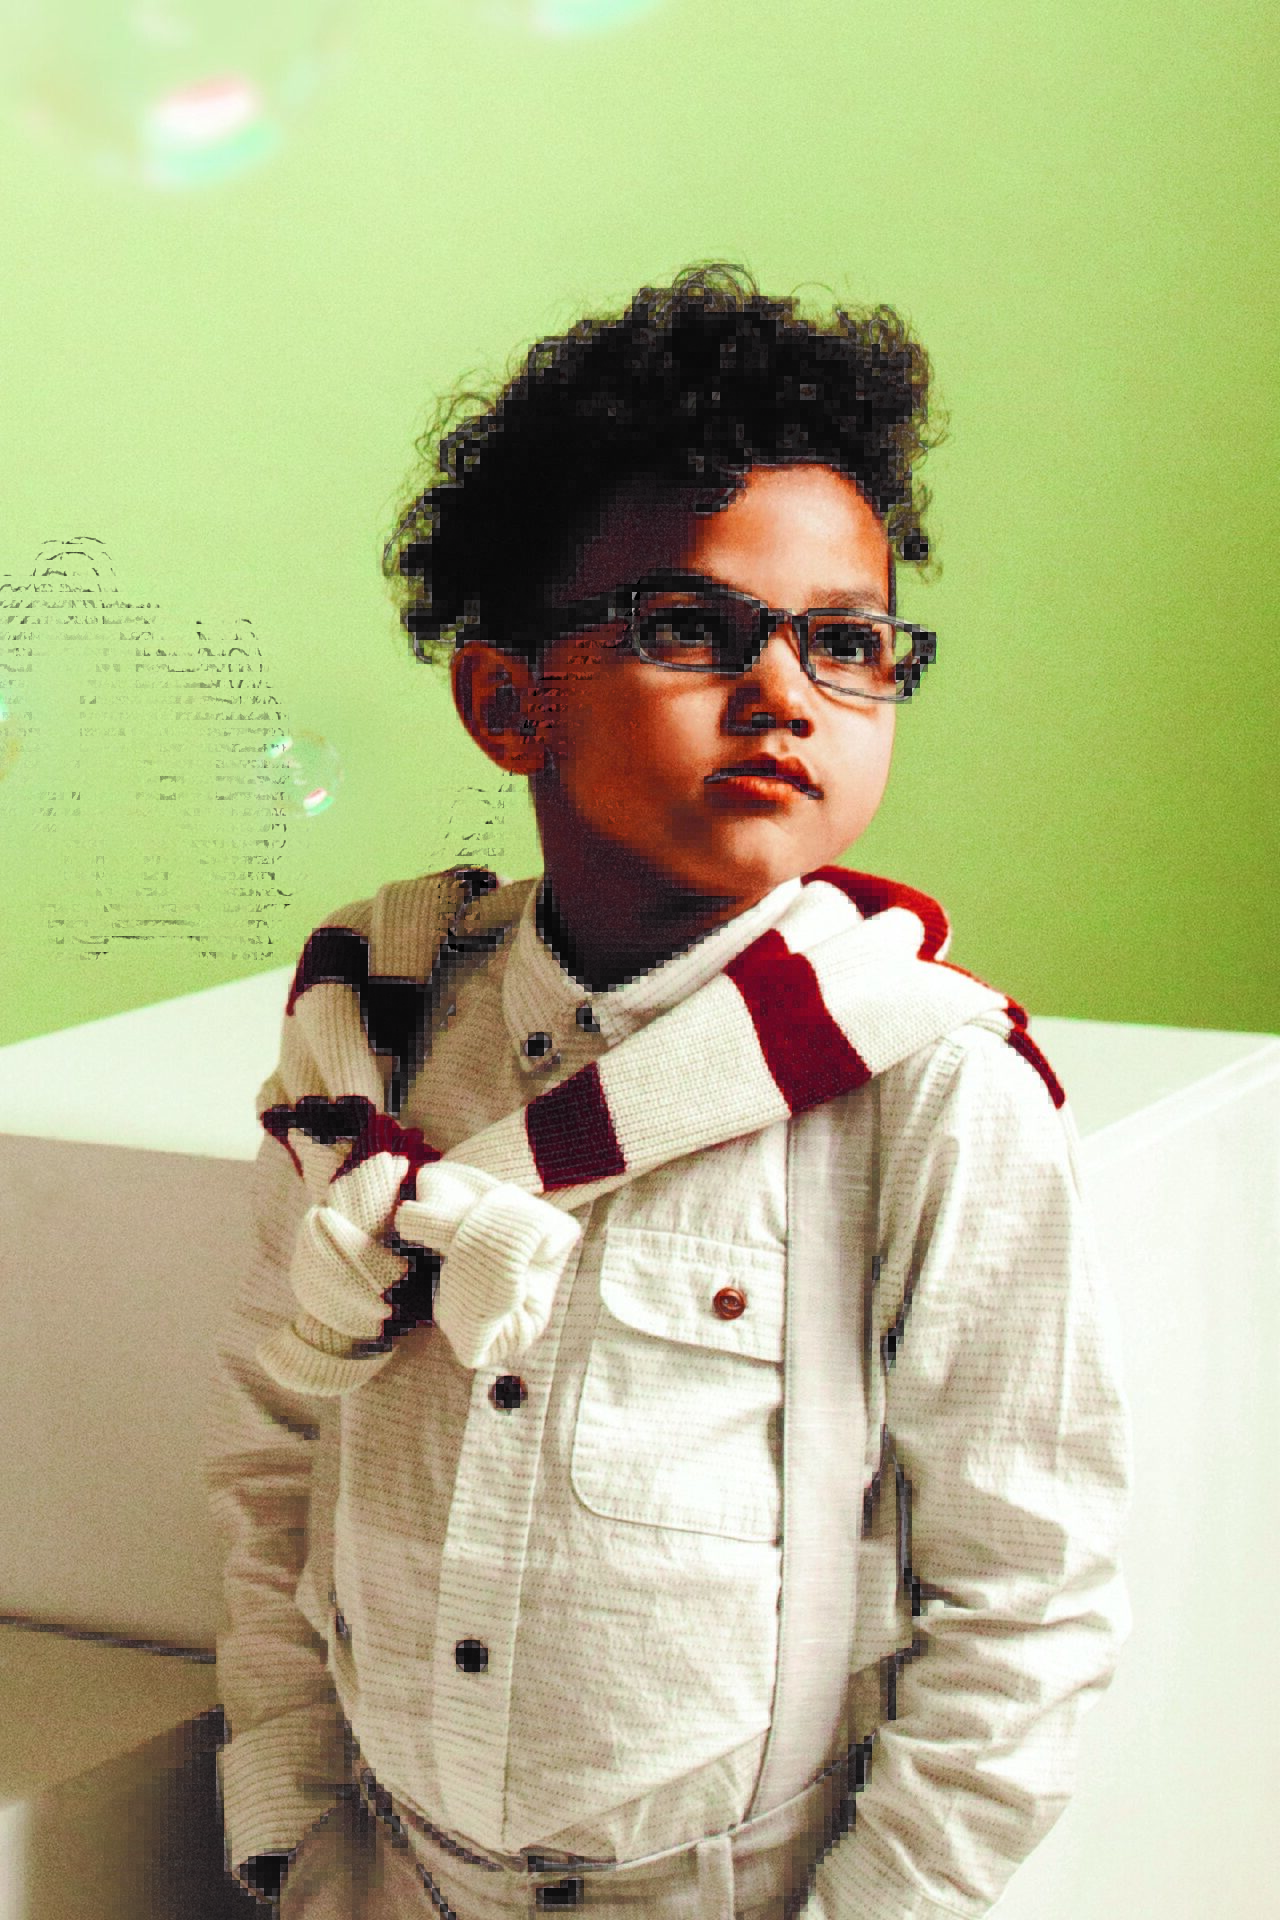 A young boy wearing glasses and a scarf.